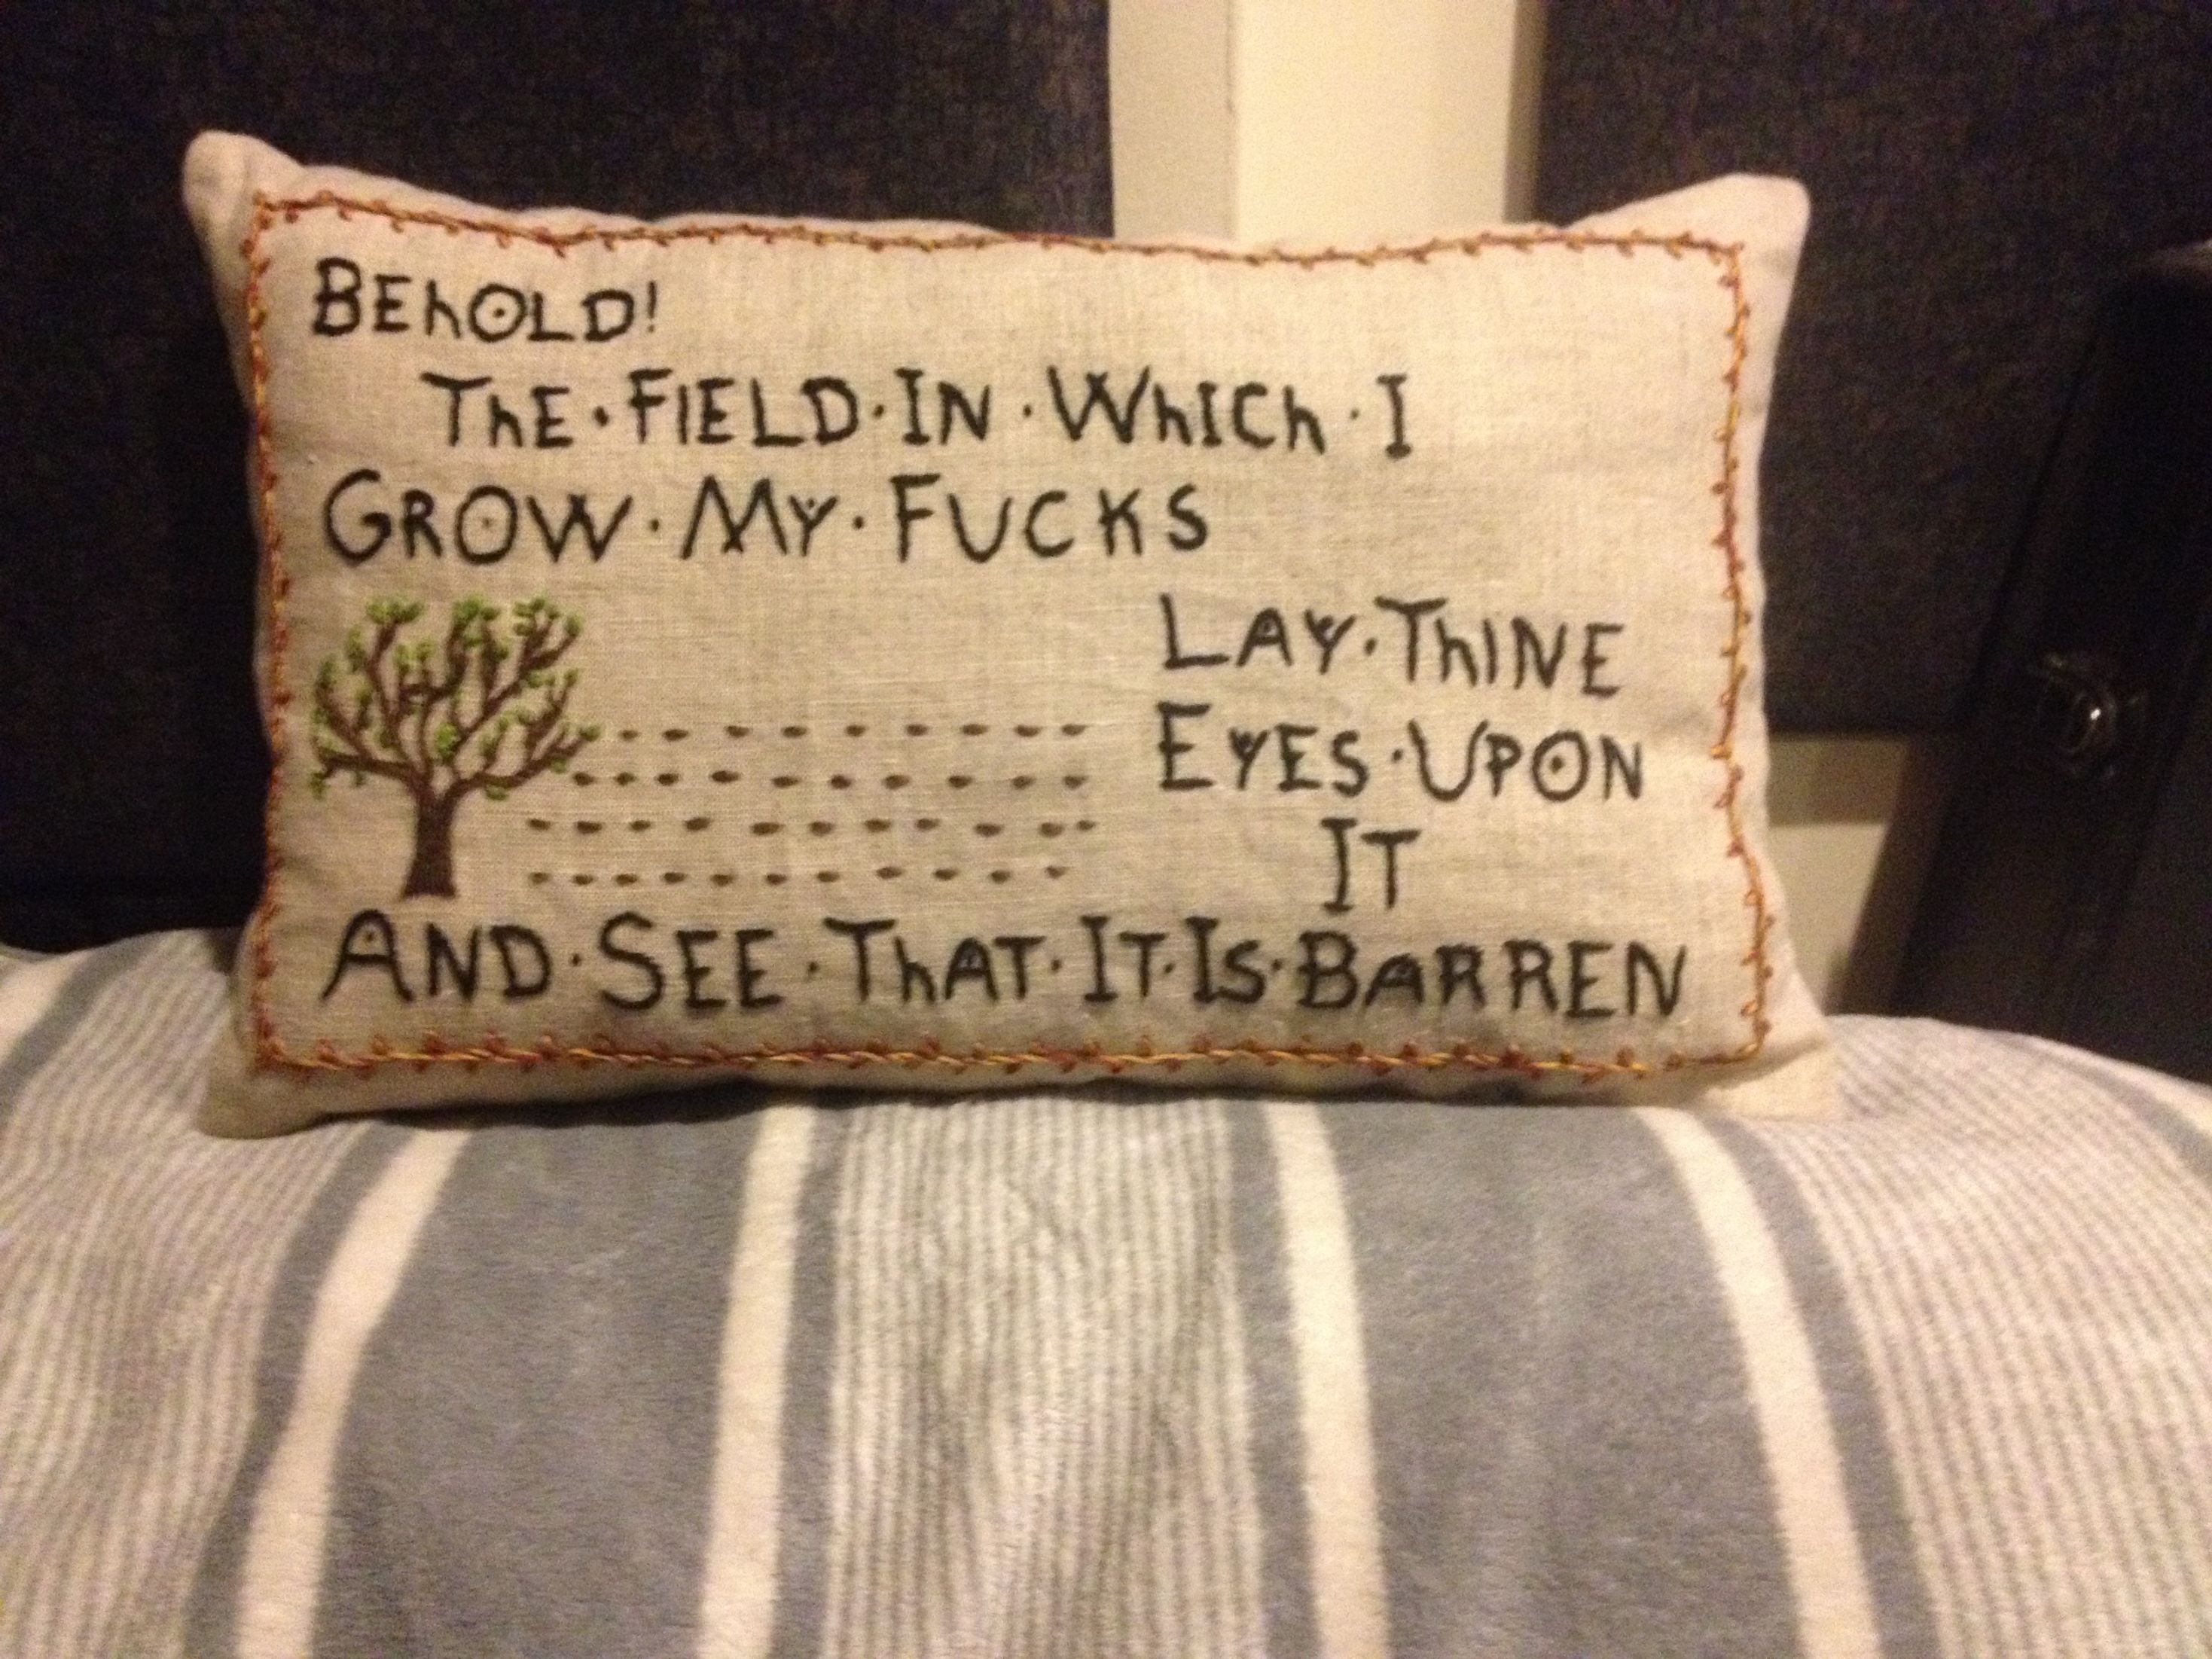 The embroidery of the text "Behold! The field on which I grow my fucks / Lay thine eyes upon/and see that it is barren." on a pillow, which rests on a grey-blanketed bed.